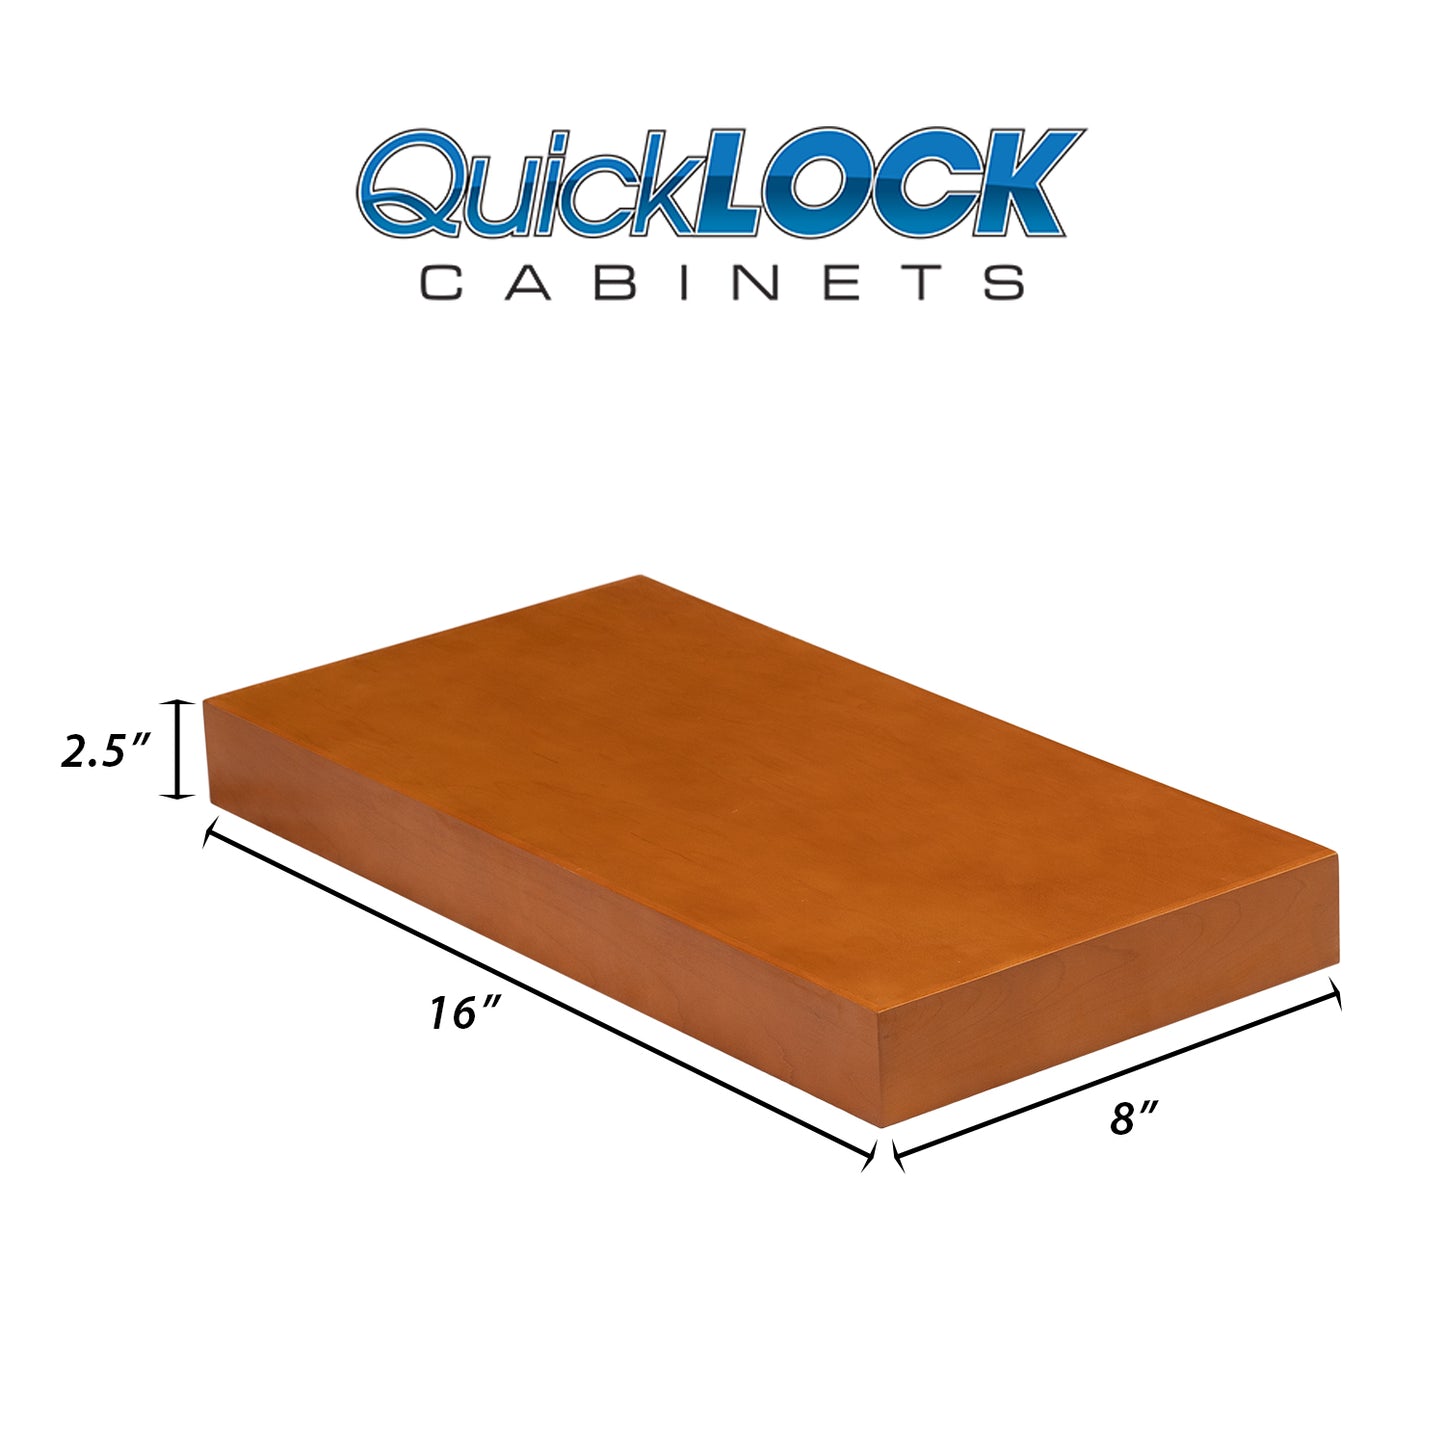 Quicklock Cabinets Floating Shelves | 2.5" Thick | Provincial Stain, 8" D x 16" W x 2.5" H | American Made | Hardwood Bracket | Complete Shelf Unit